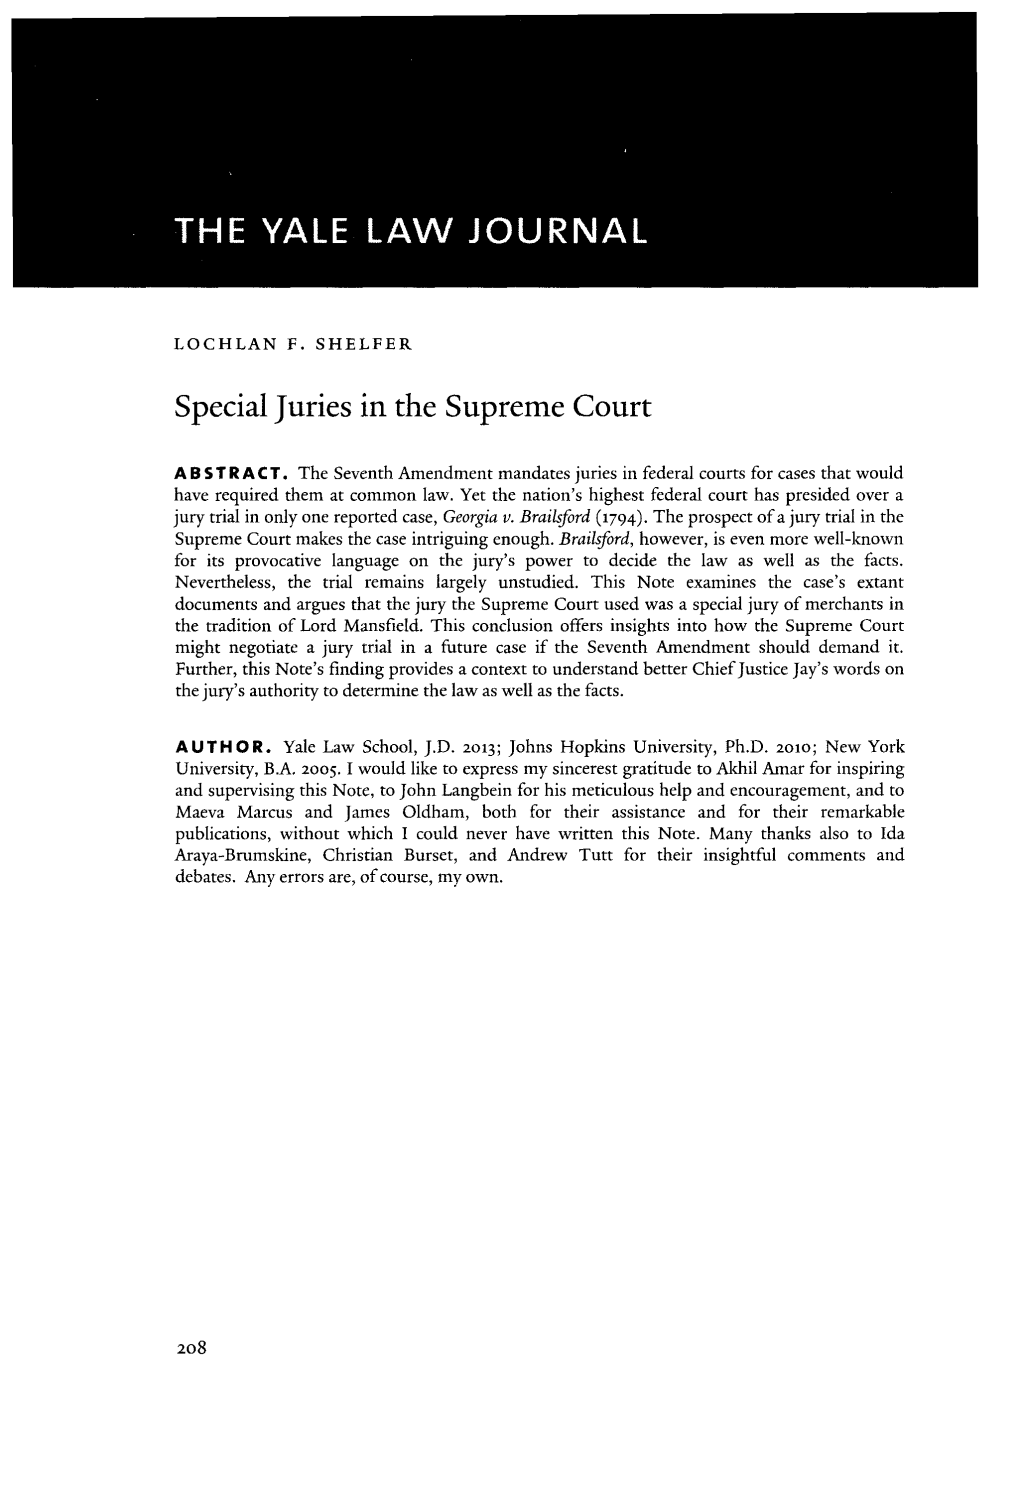 Special Juries in the Supreme Court